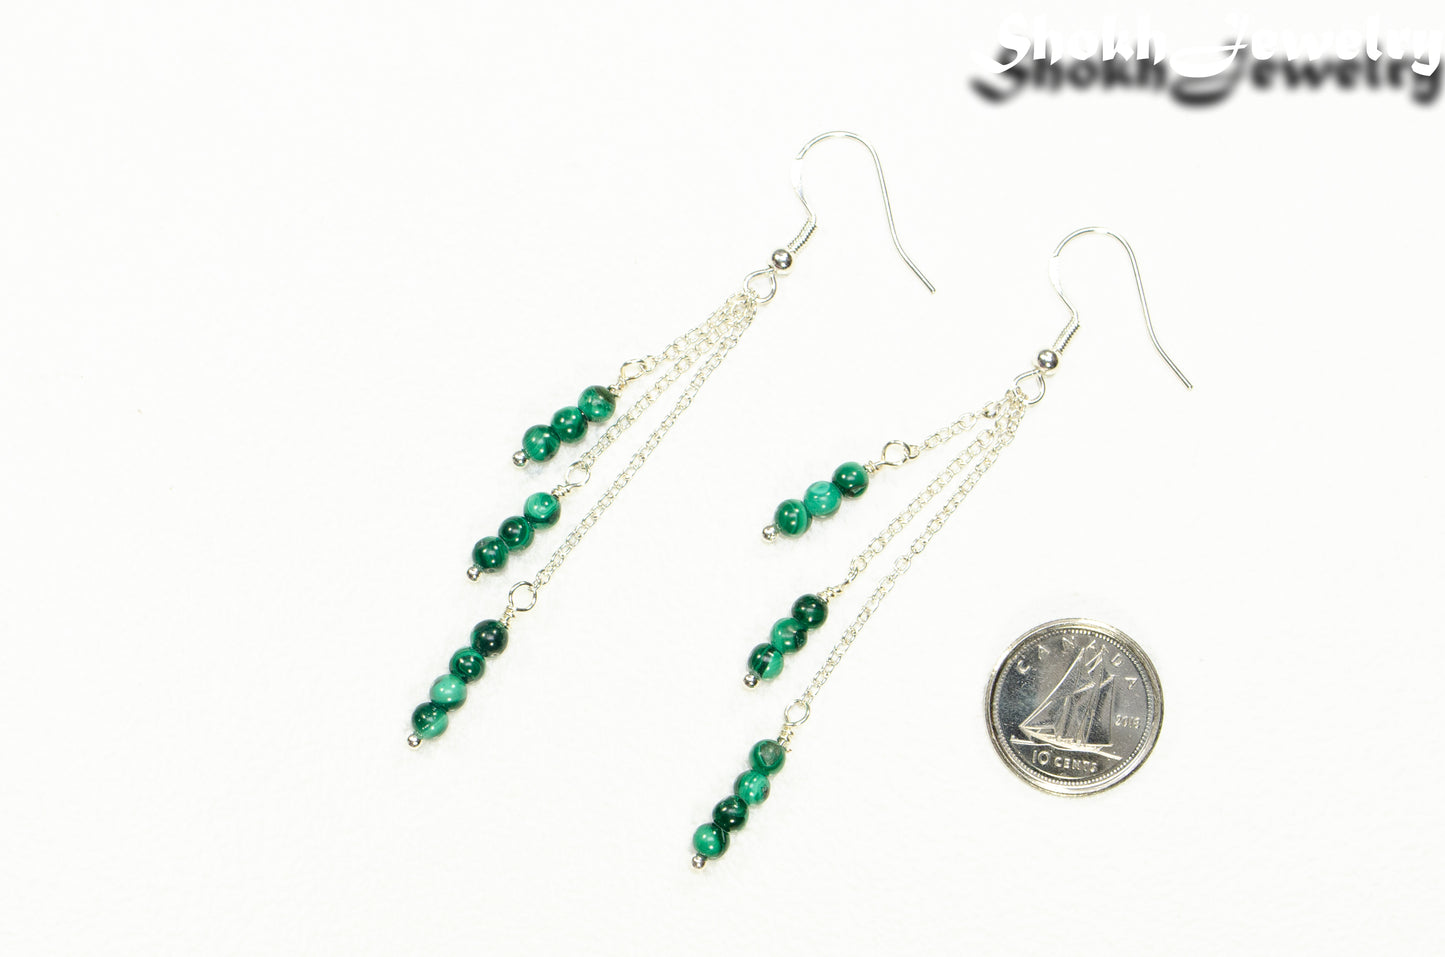 Silver Plated Chain and Malachite Stone Earrings beside a dime.